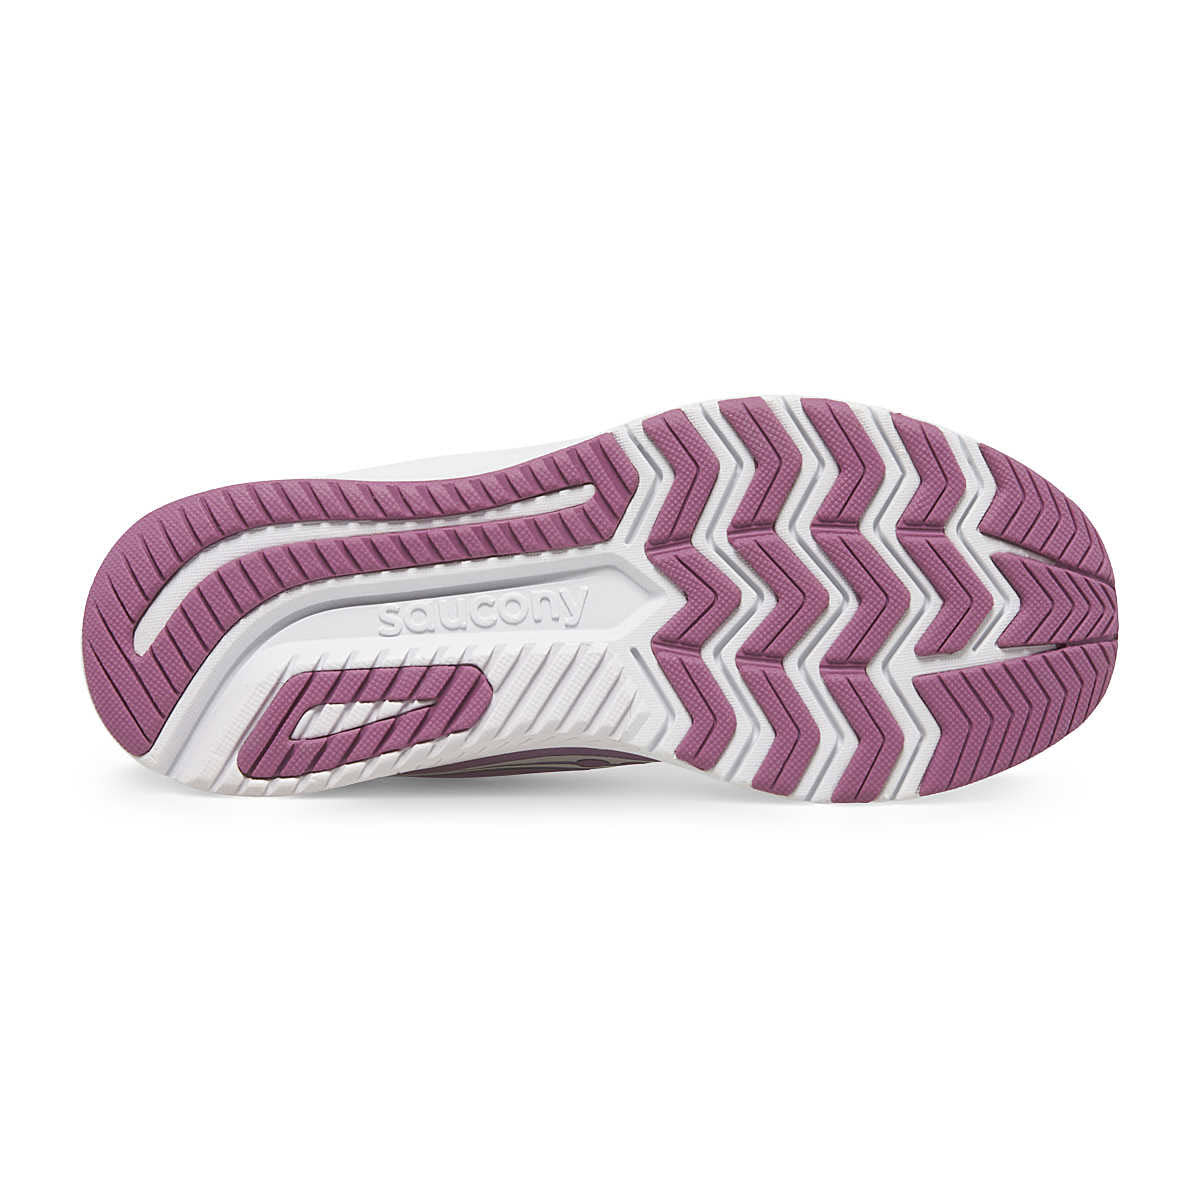 Bottom view of a purple and white Saucony kids road sneaker sole with zigzag tread and brand name imprint.